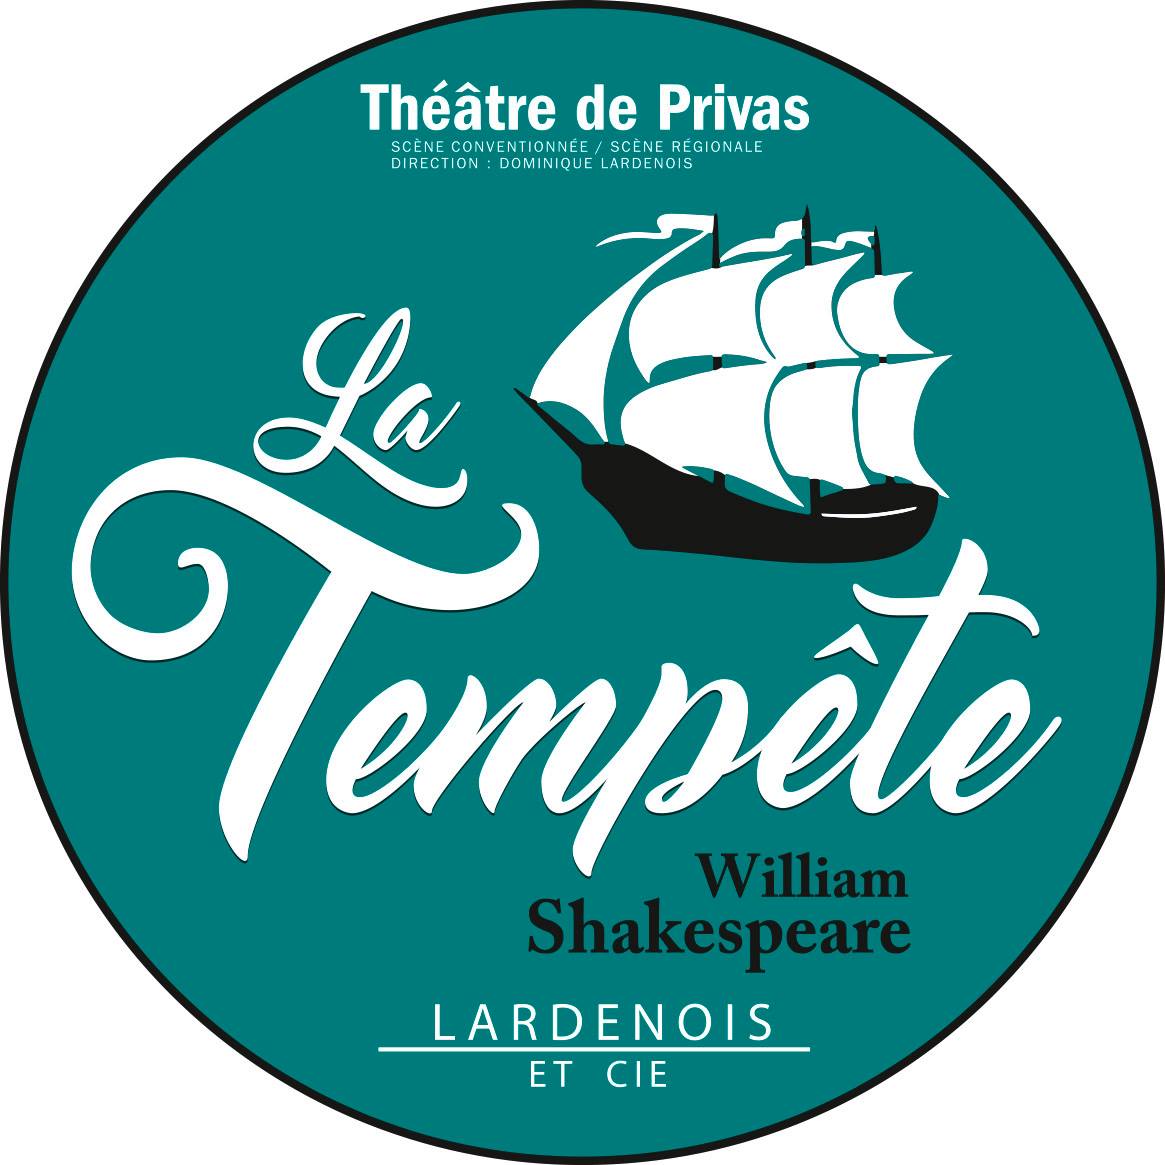 Chiraz and Hervé cast in ‘THE TEMPEST’